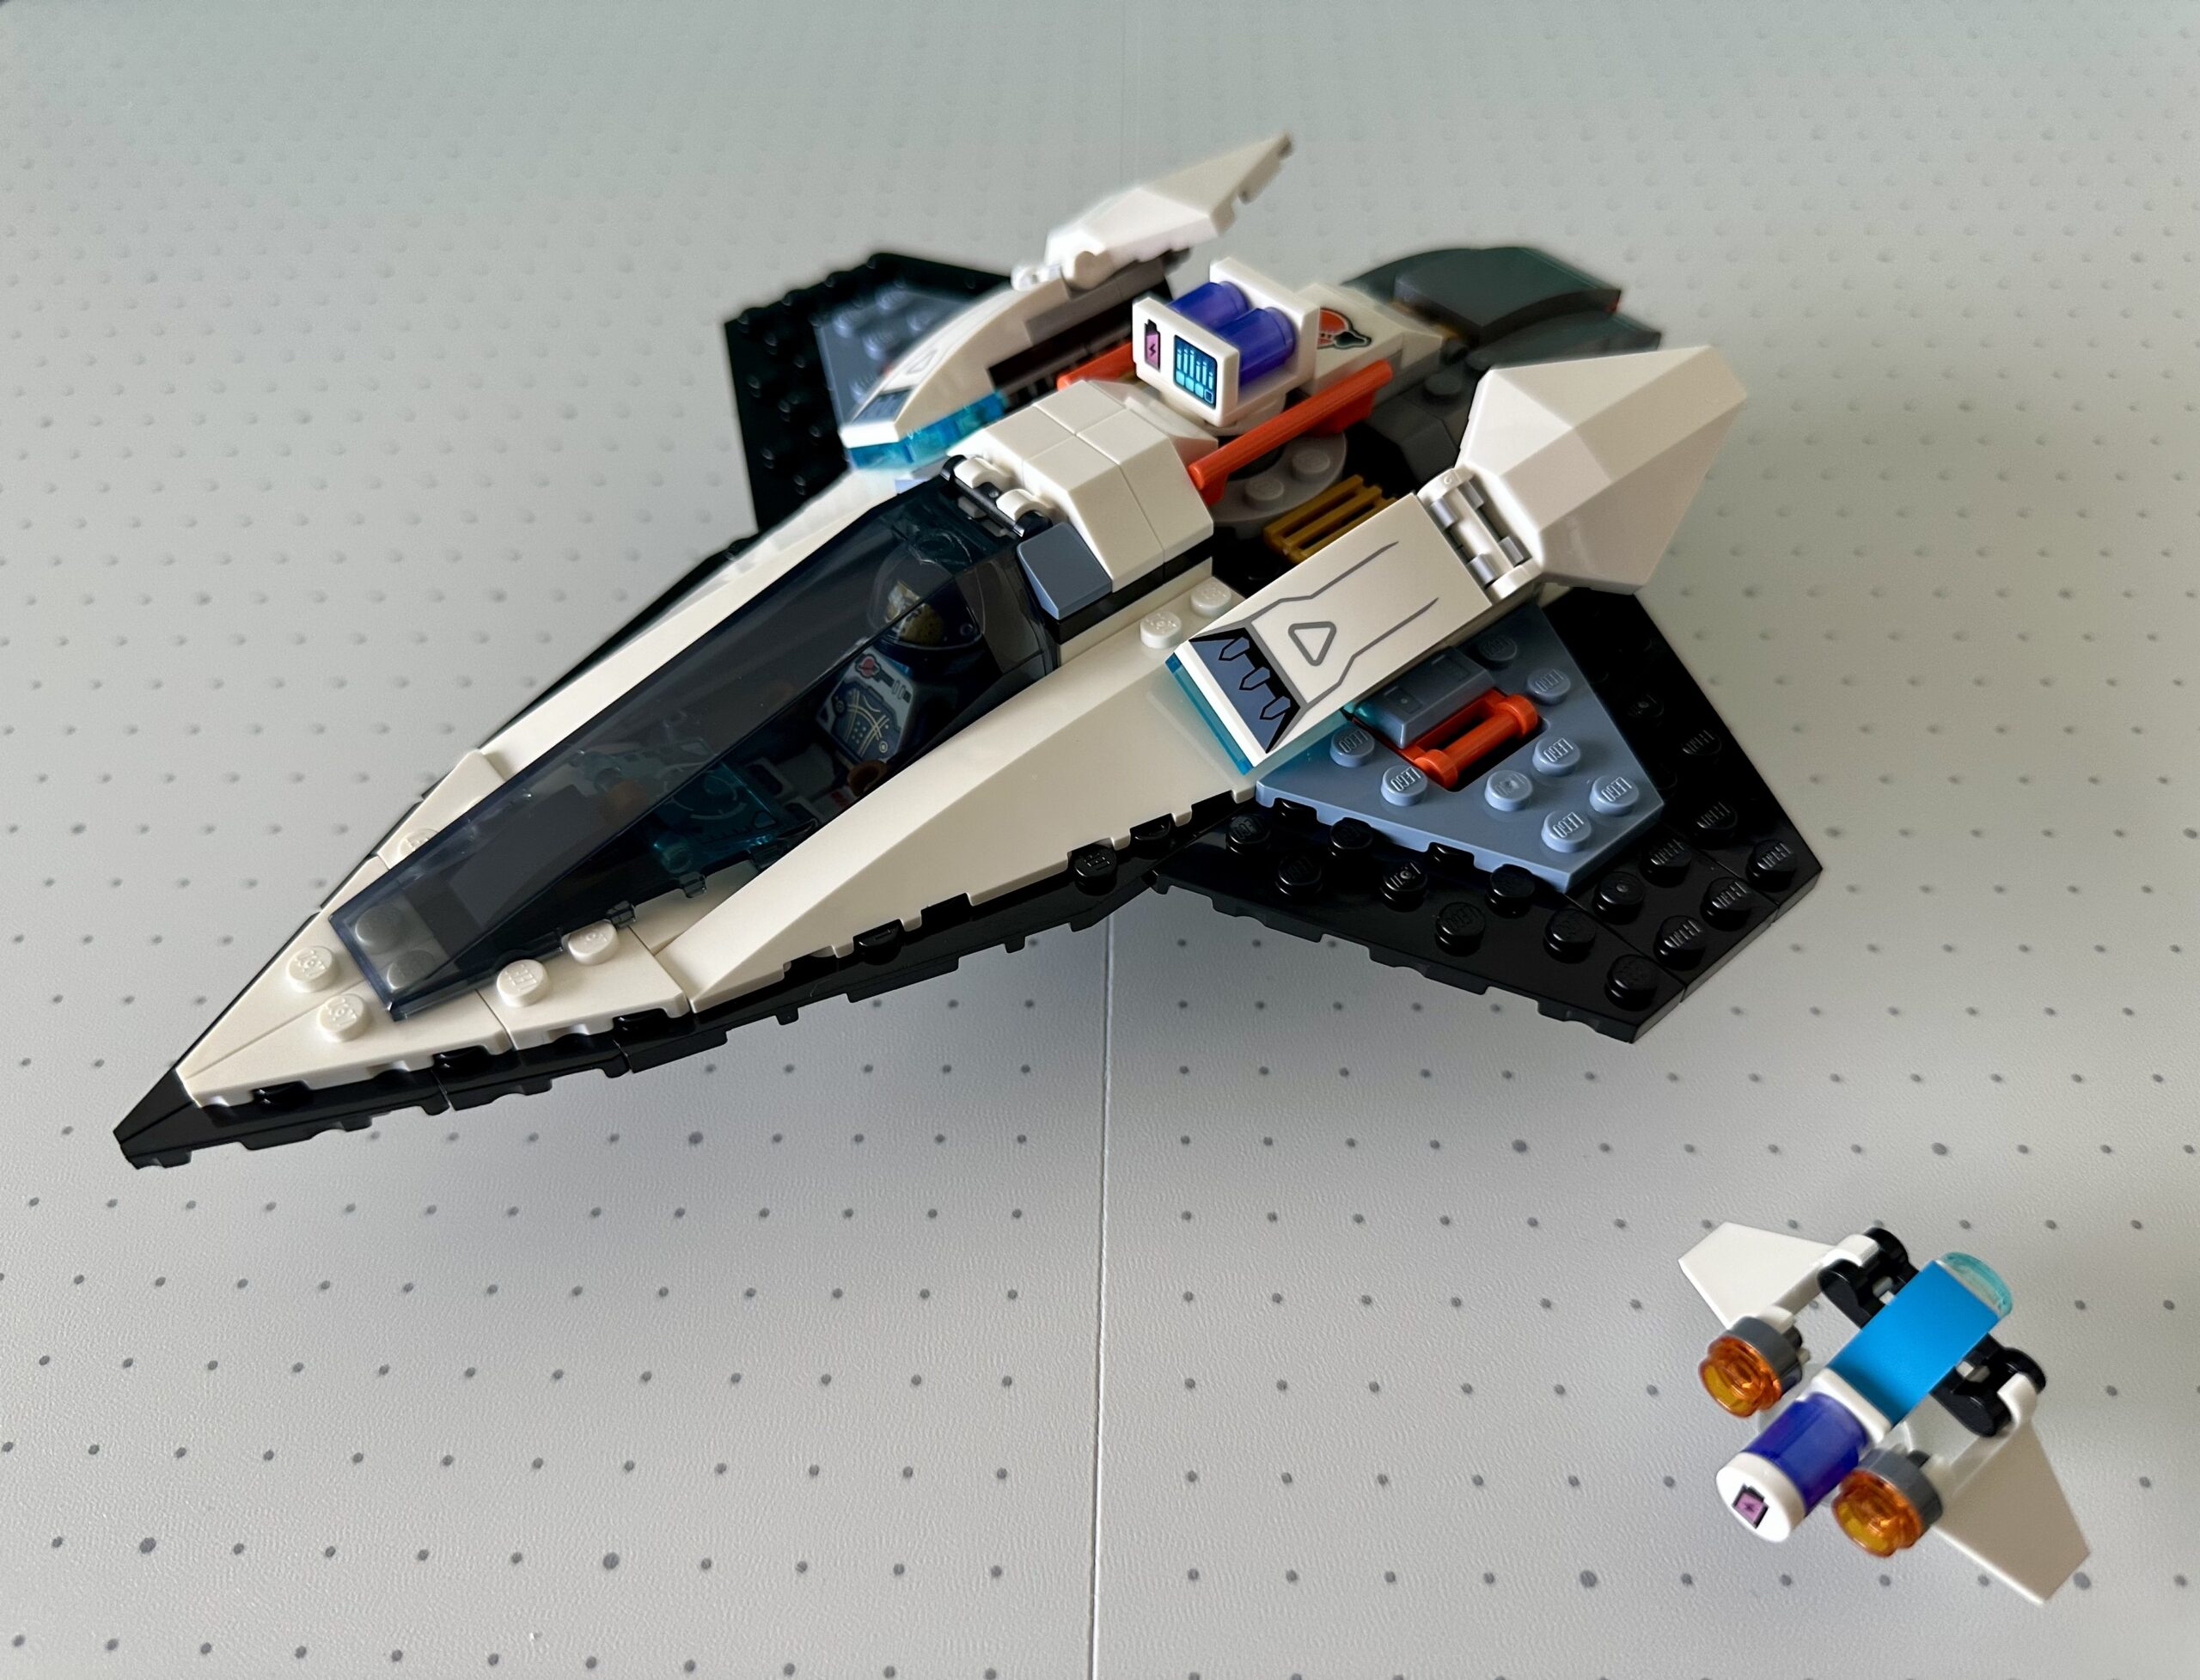 A speedy-looking black and white LEGO spaceship with a dark tinted canopy. A small drone flies nearby.